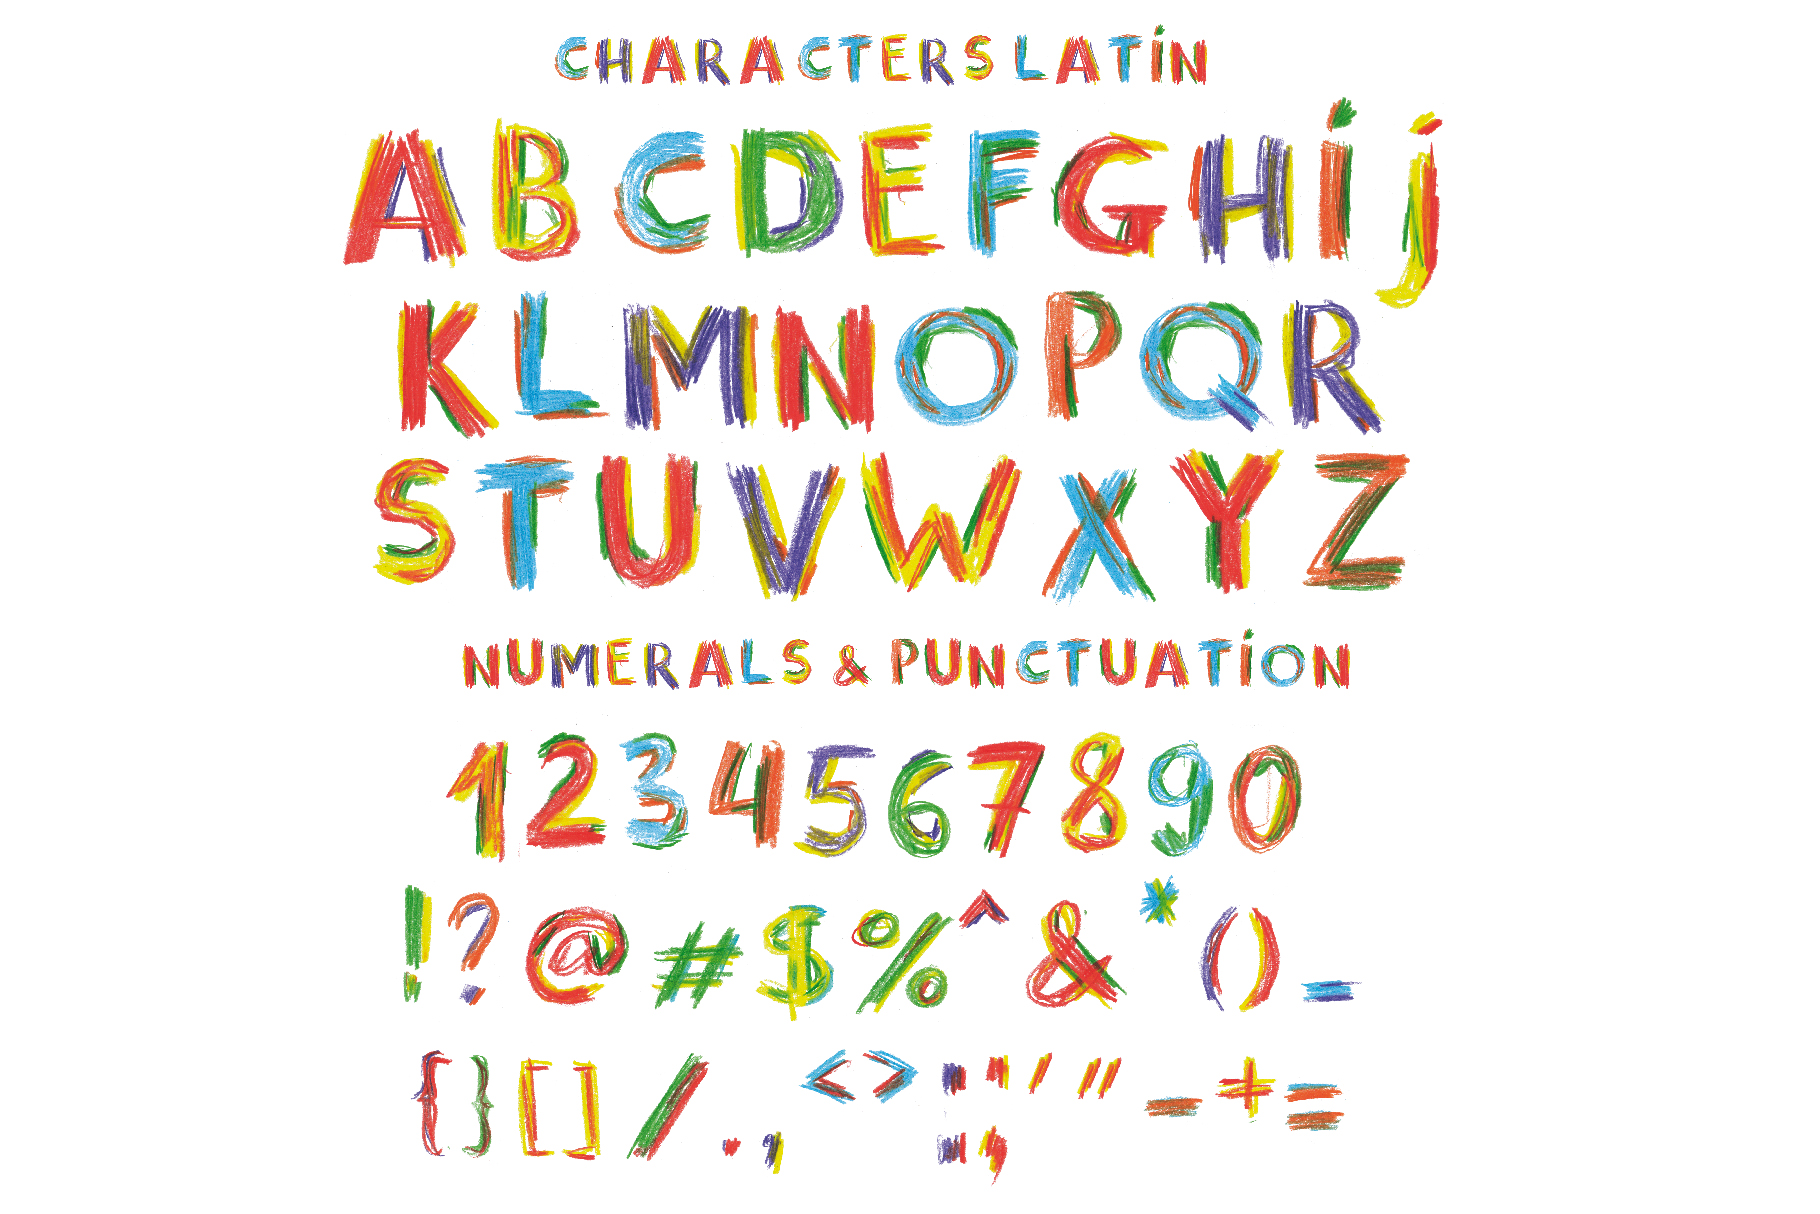 Latin colorful letters with numerals & punctuation.